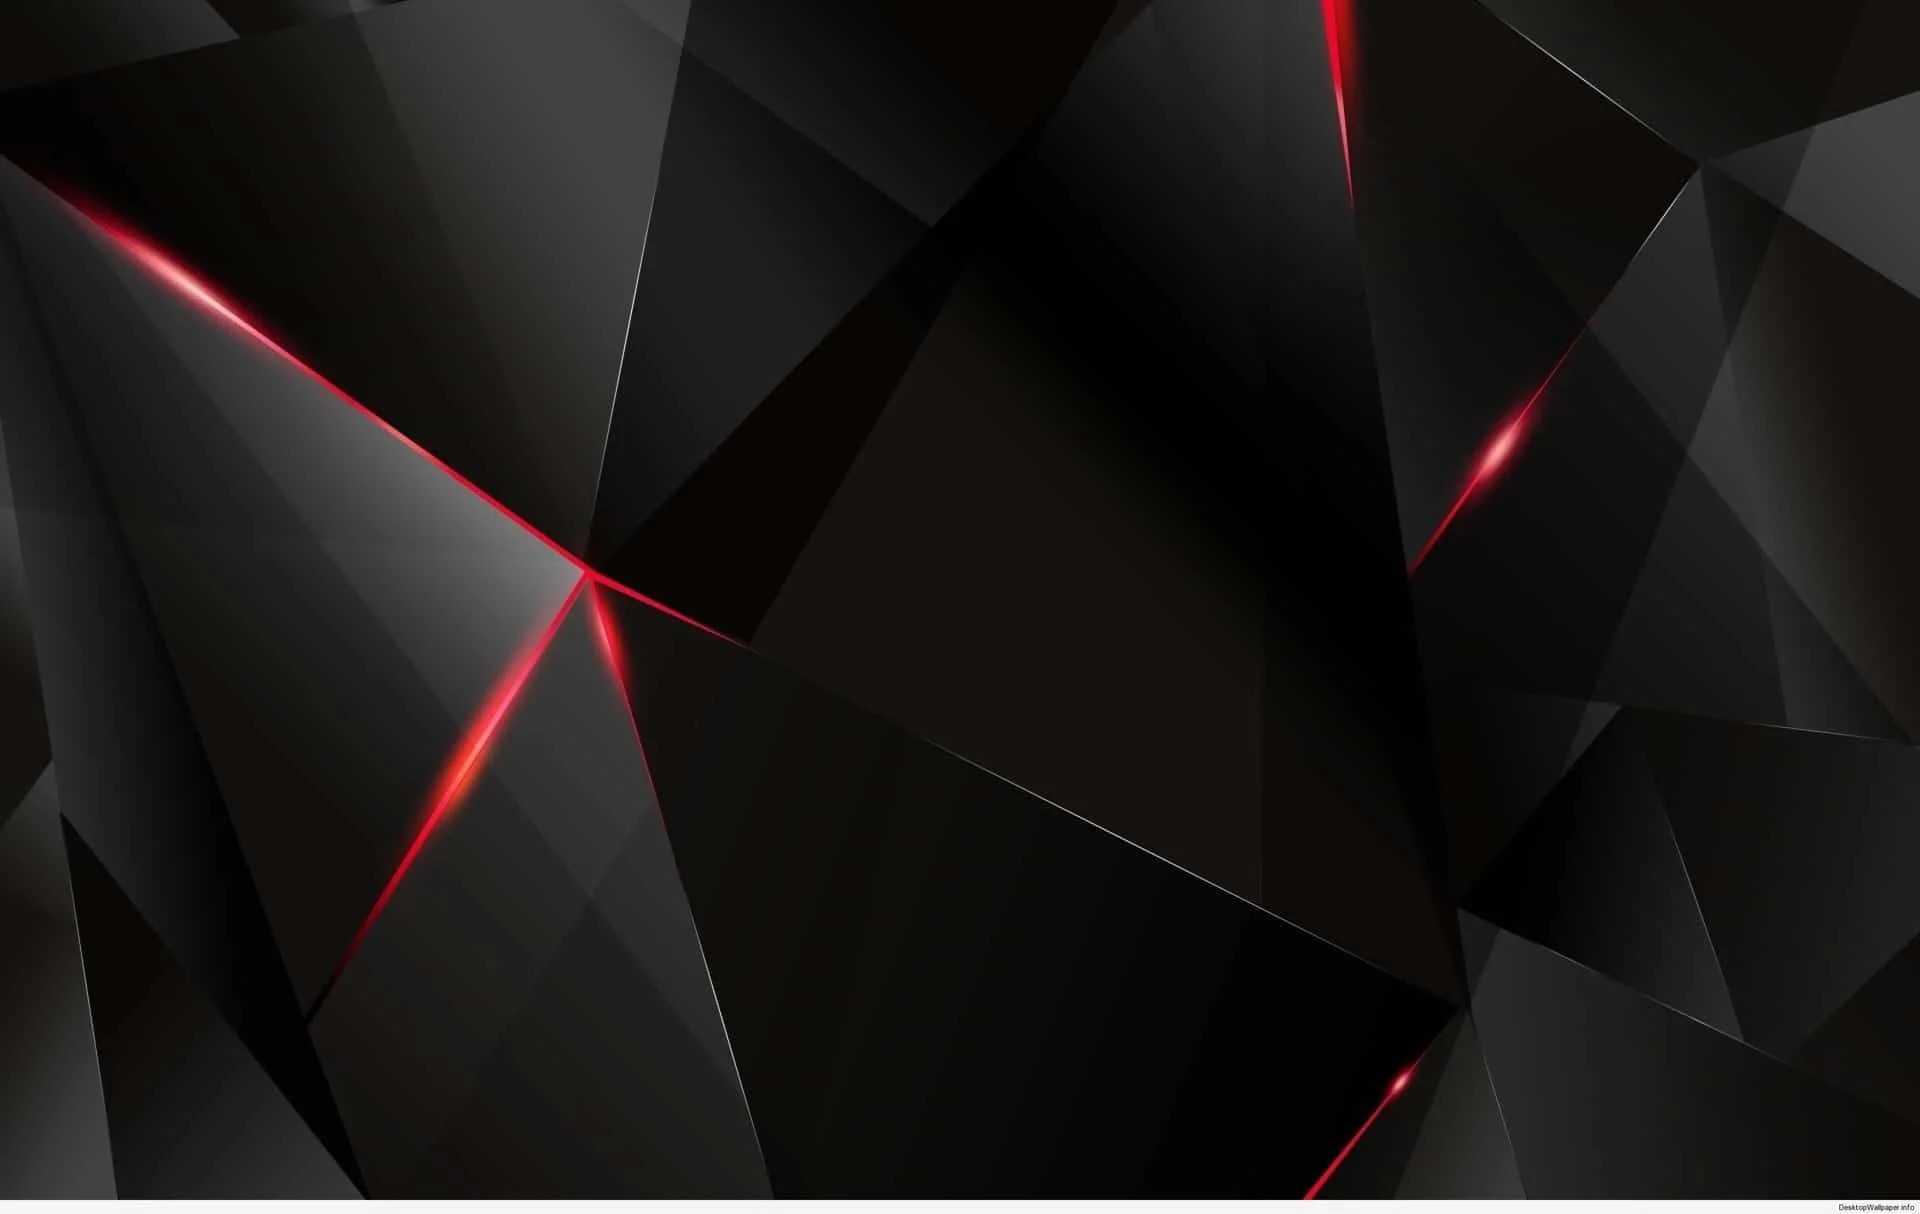 1920x1214 Red and Black Geometric Wallpapers Top Free Red and Black Geometric Backgrounds